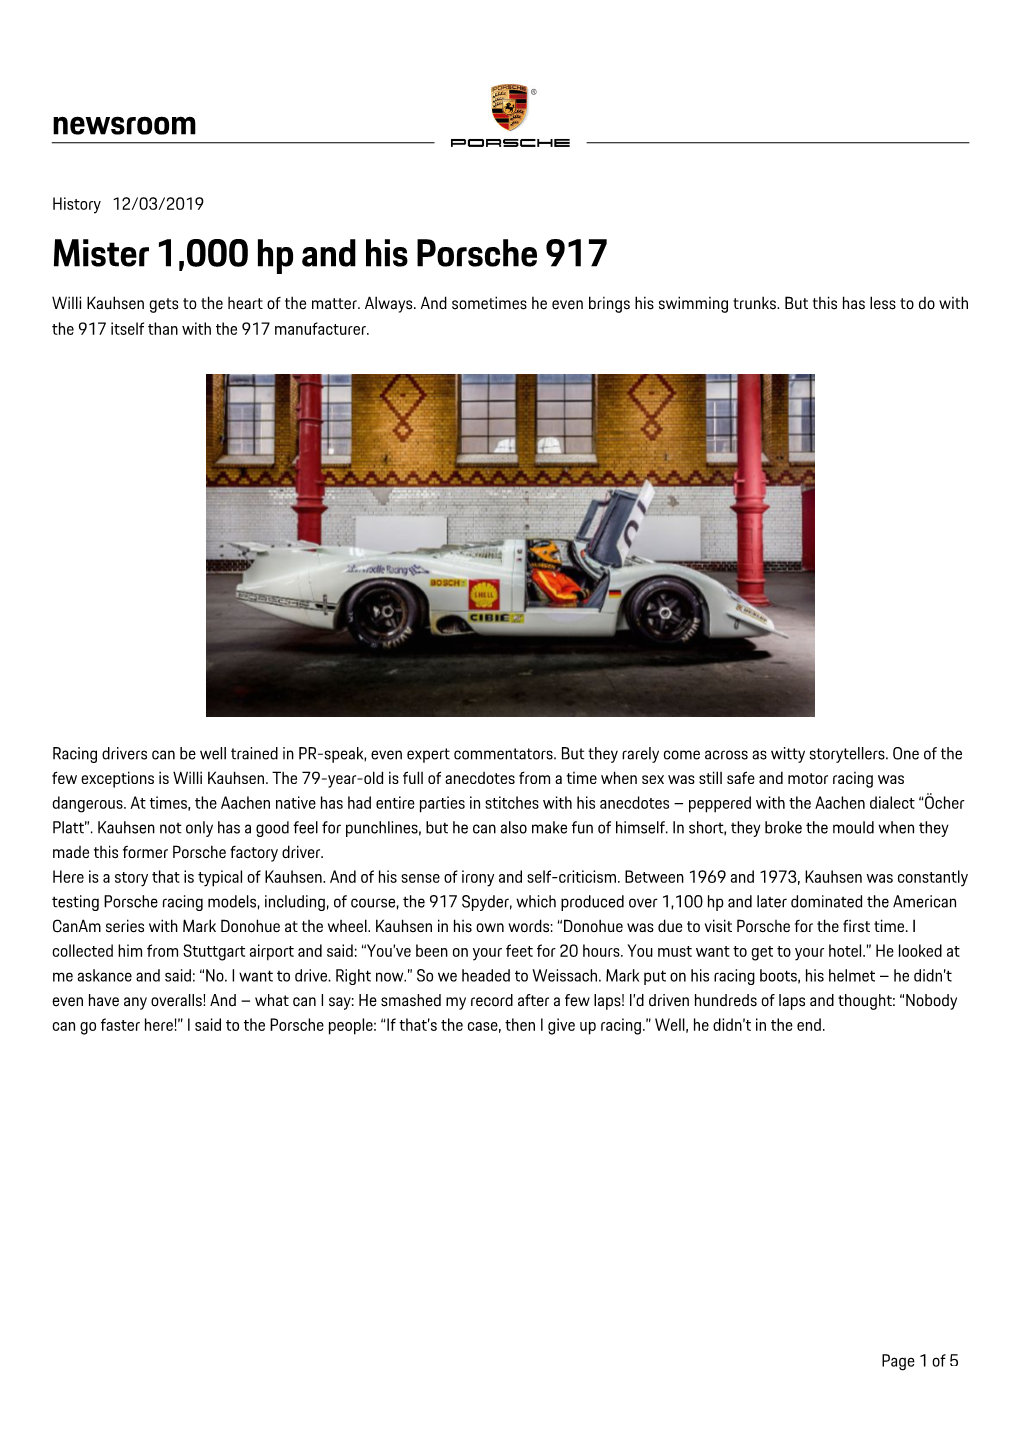 Mister 1,000 Hp and His Porsche 917 Willi Kauhsen Gets to the Heart of the Matter